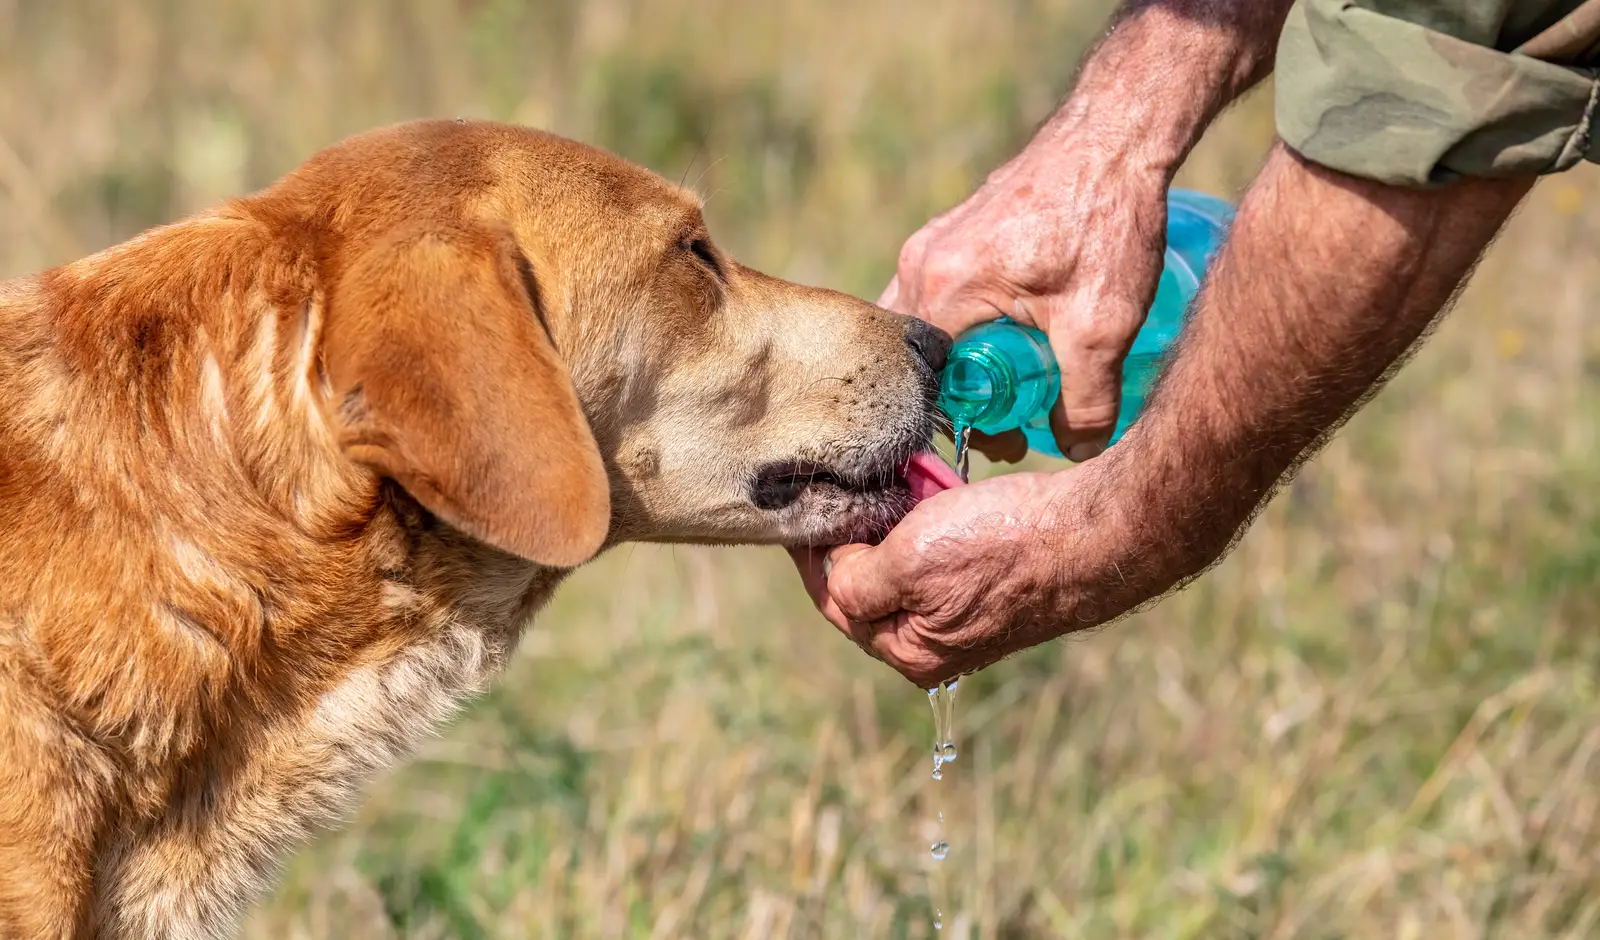 How To Stop My Dog From Licking Other Dogs Pee? 5 Clear Issues Making Dog Lick Urine